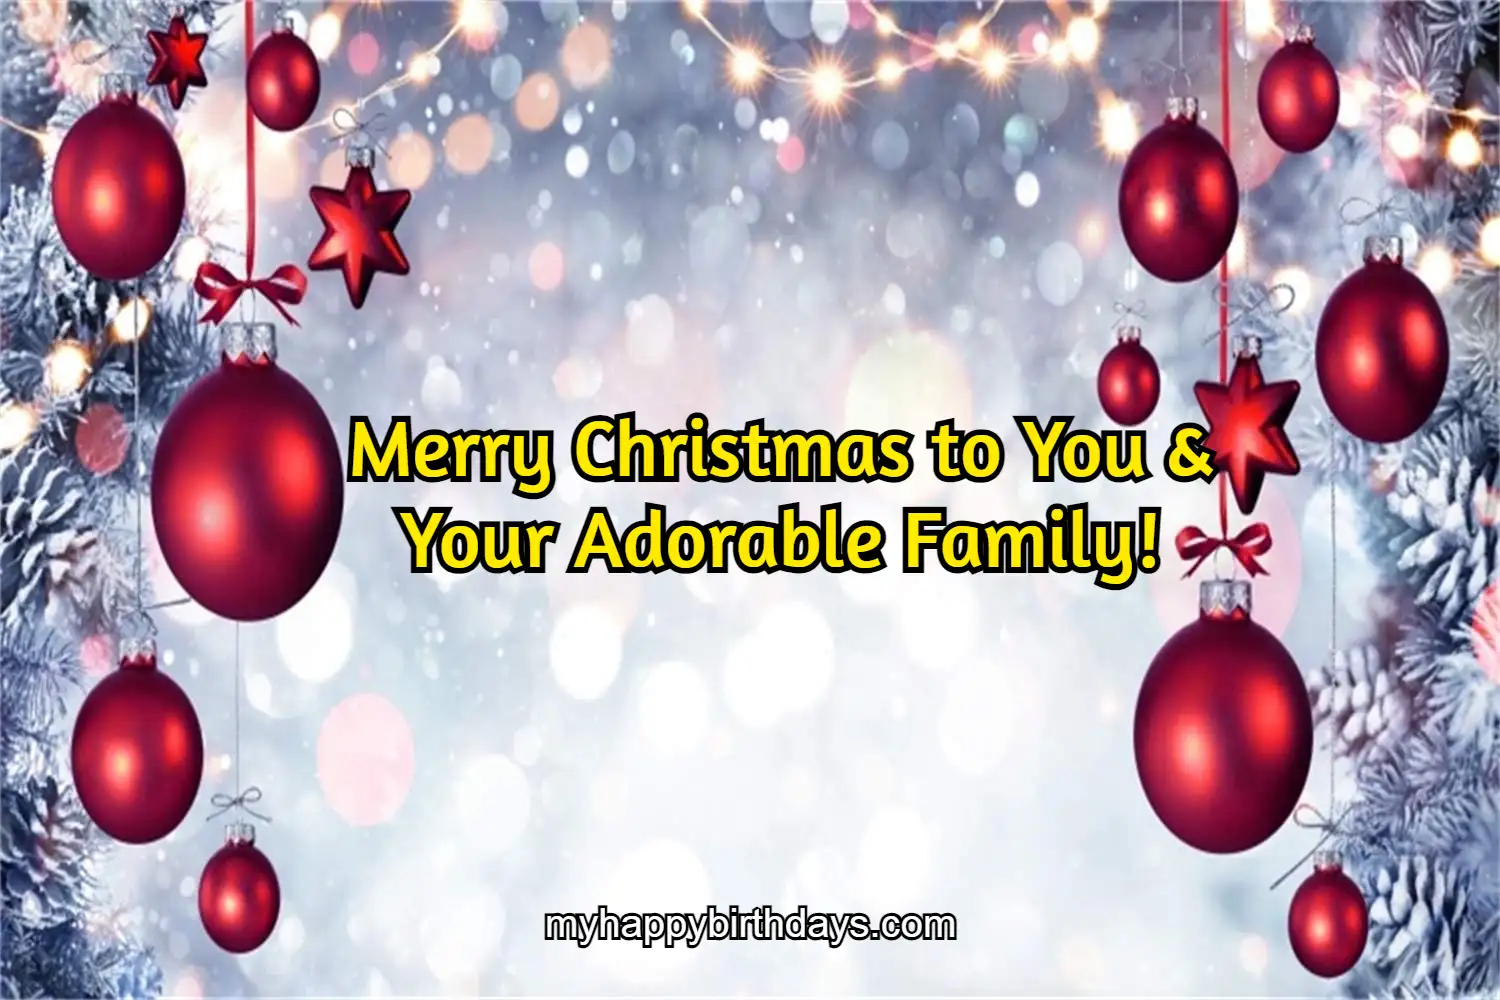 Merry Chirstmas quotes